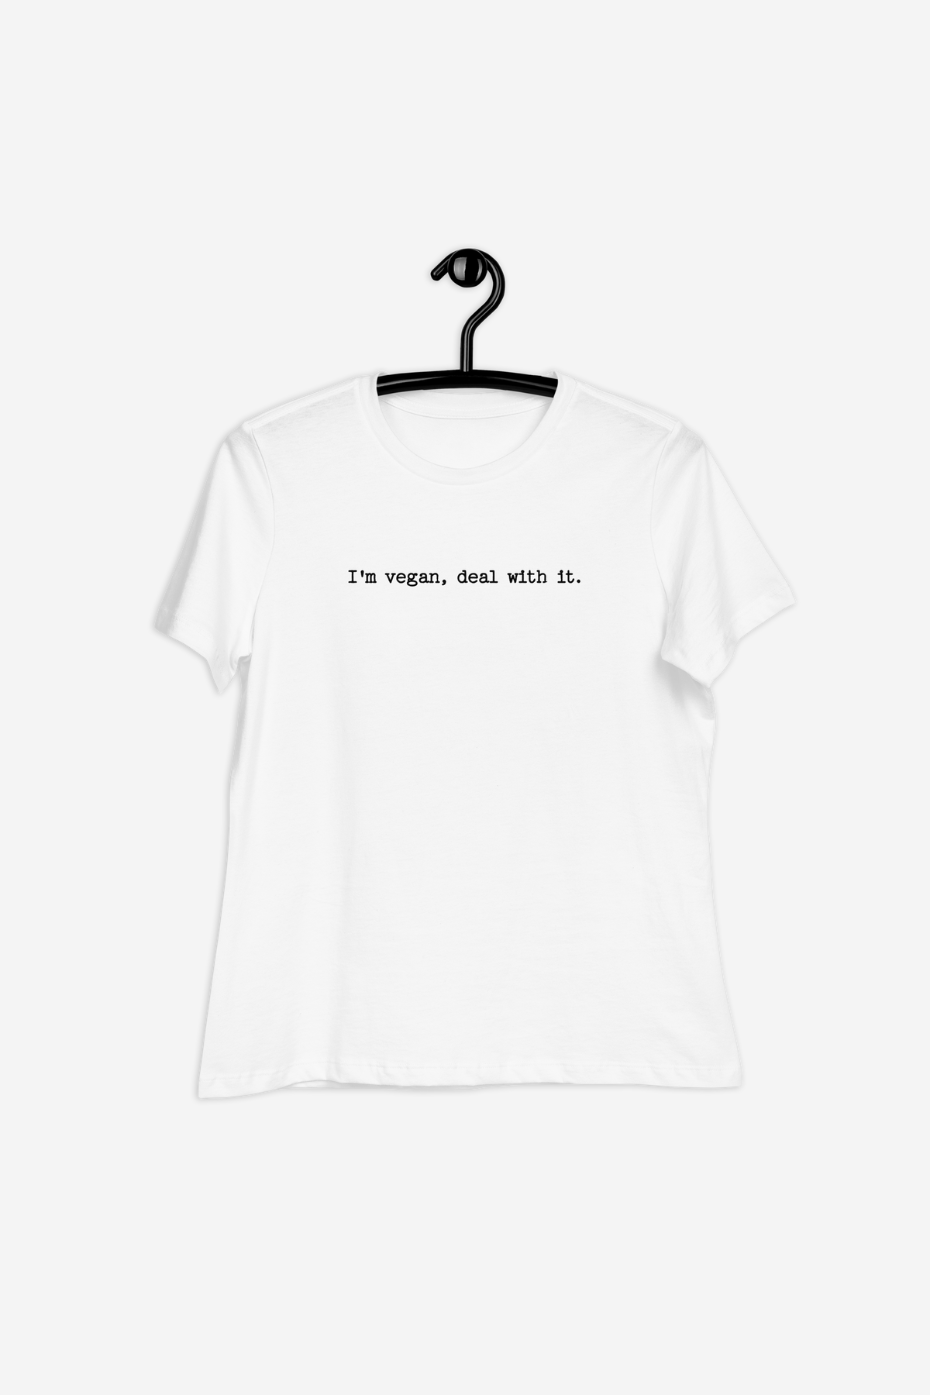 Deal With it Women's Relaxed T-Shirt